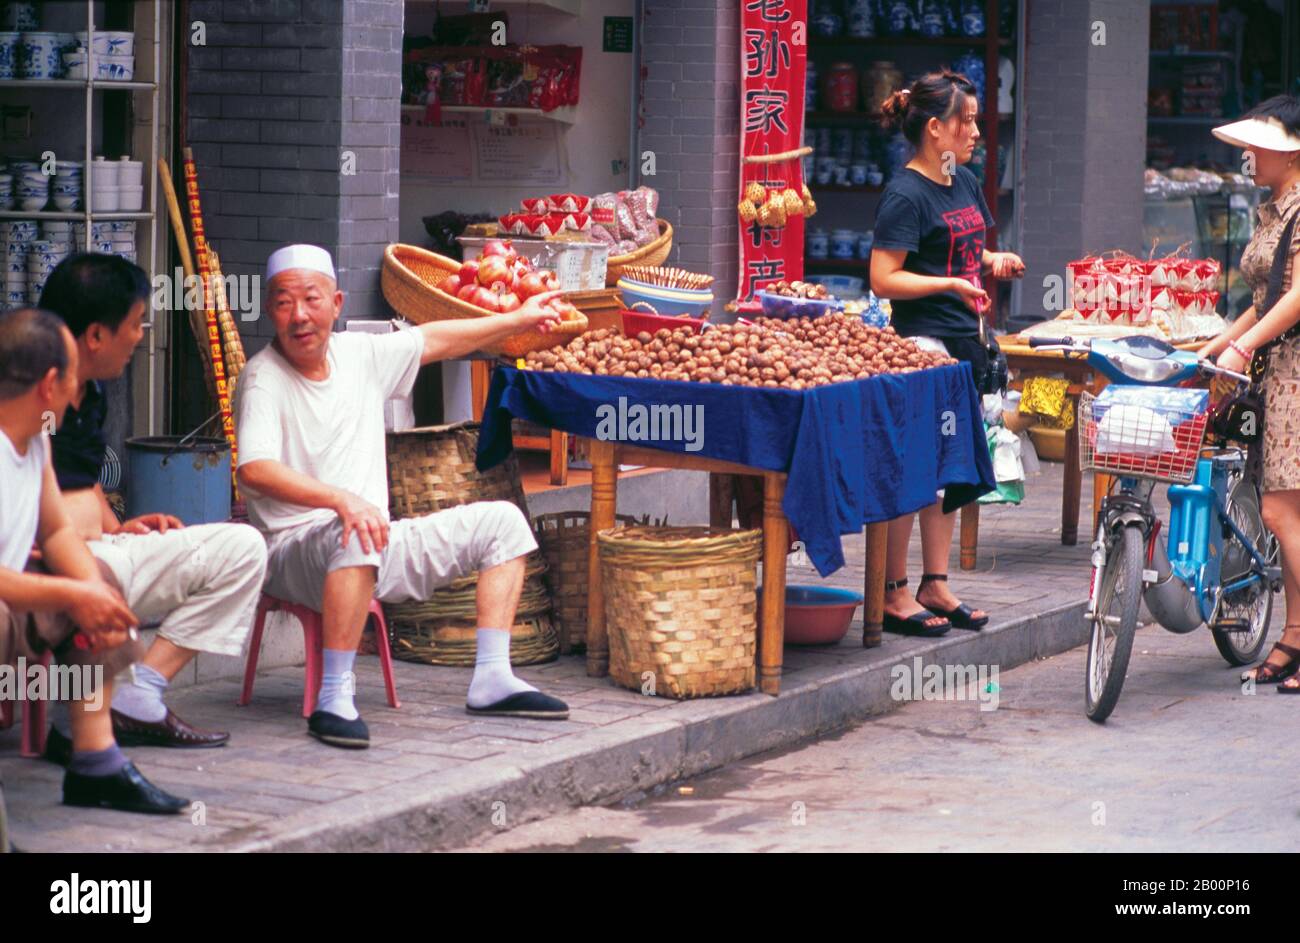 China: A Hui walnut vendor points the way on a busy street in Xi'an's Muslim Quarter, Shaanxi Province.  Xi'an is the capital of Shaanxi province, and a sub-provincial city in the People's Republic of China. One of the oldest cities in China, with more than 3,100 years of history, the city was known as Chang'an before the Ming Dynasty.  Xi'an is one of the Four Great Ancient Capitals of China, having held that position under several of the most important dynasties in Chinese history, including the Zhou, Qin, Han, Sui, and Tang. Xi'an is the eastern terminus of the Silk Road. Stock Photo